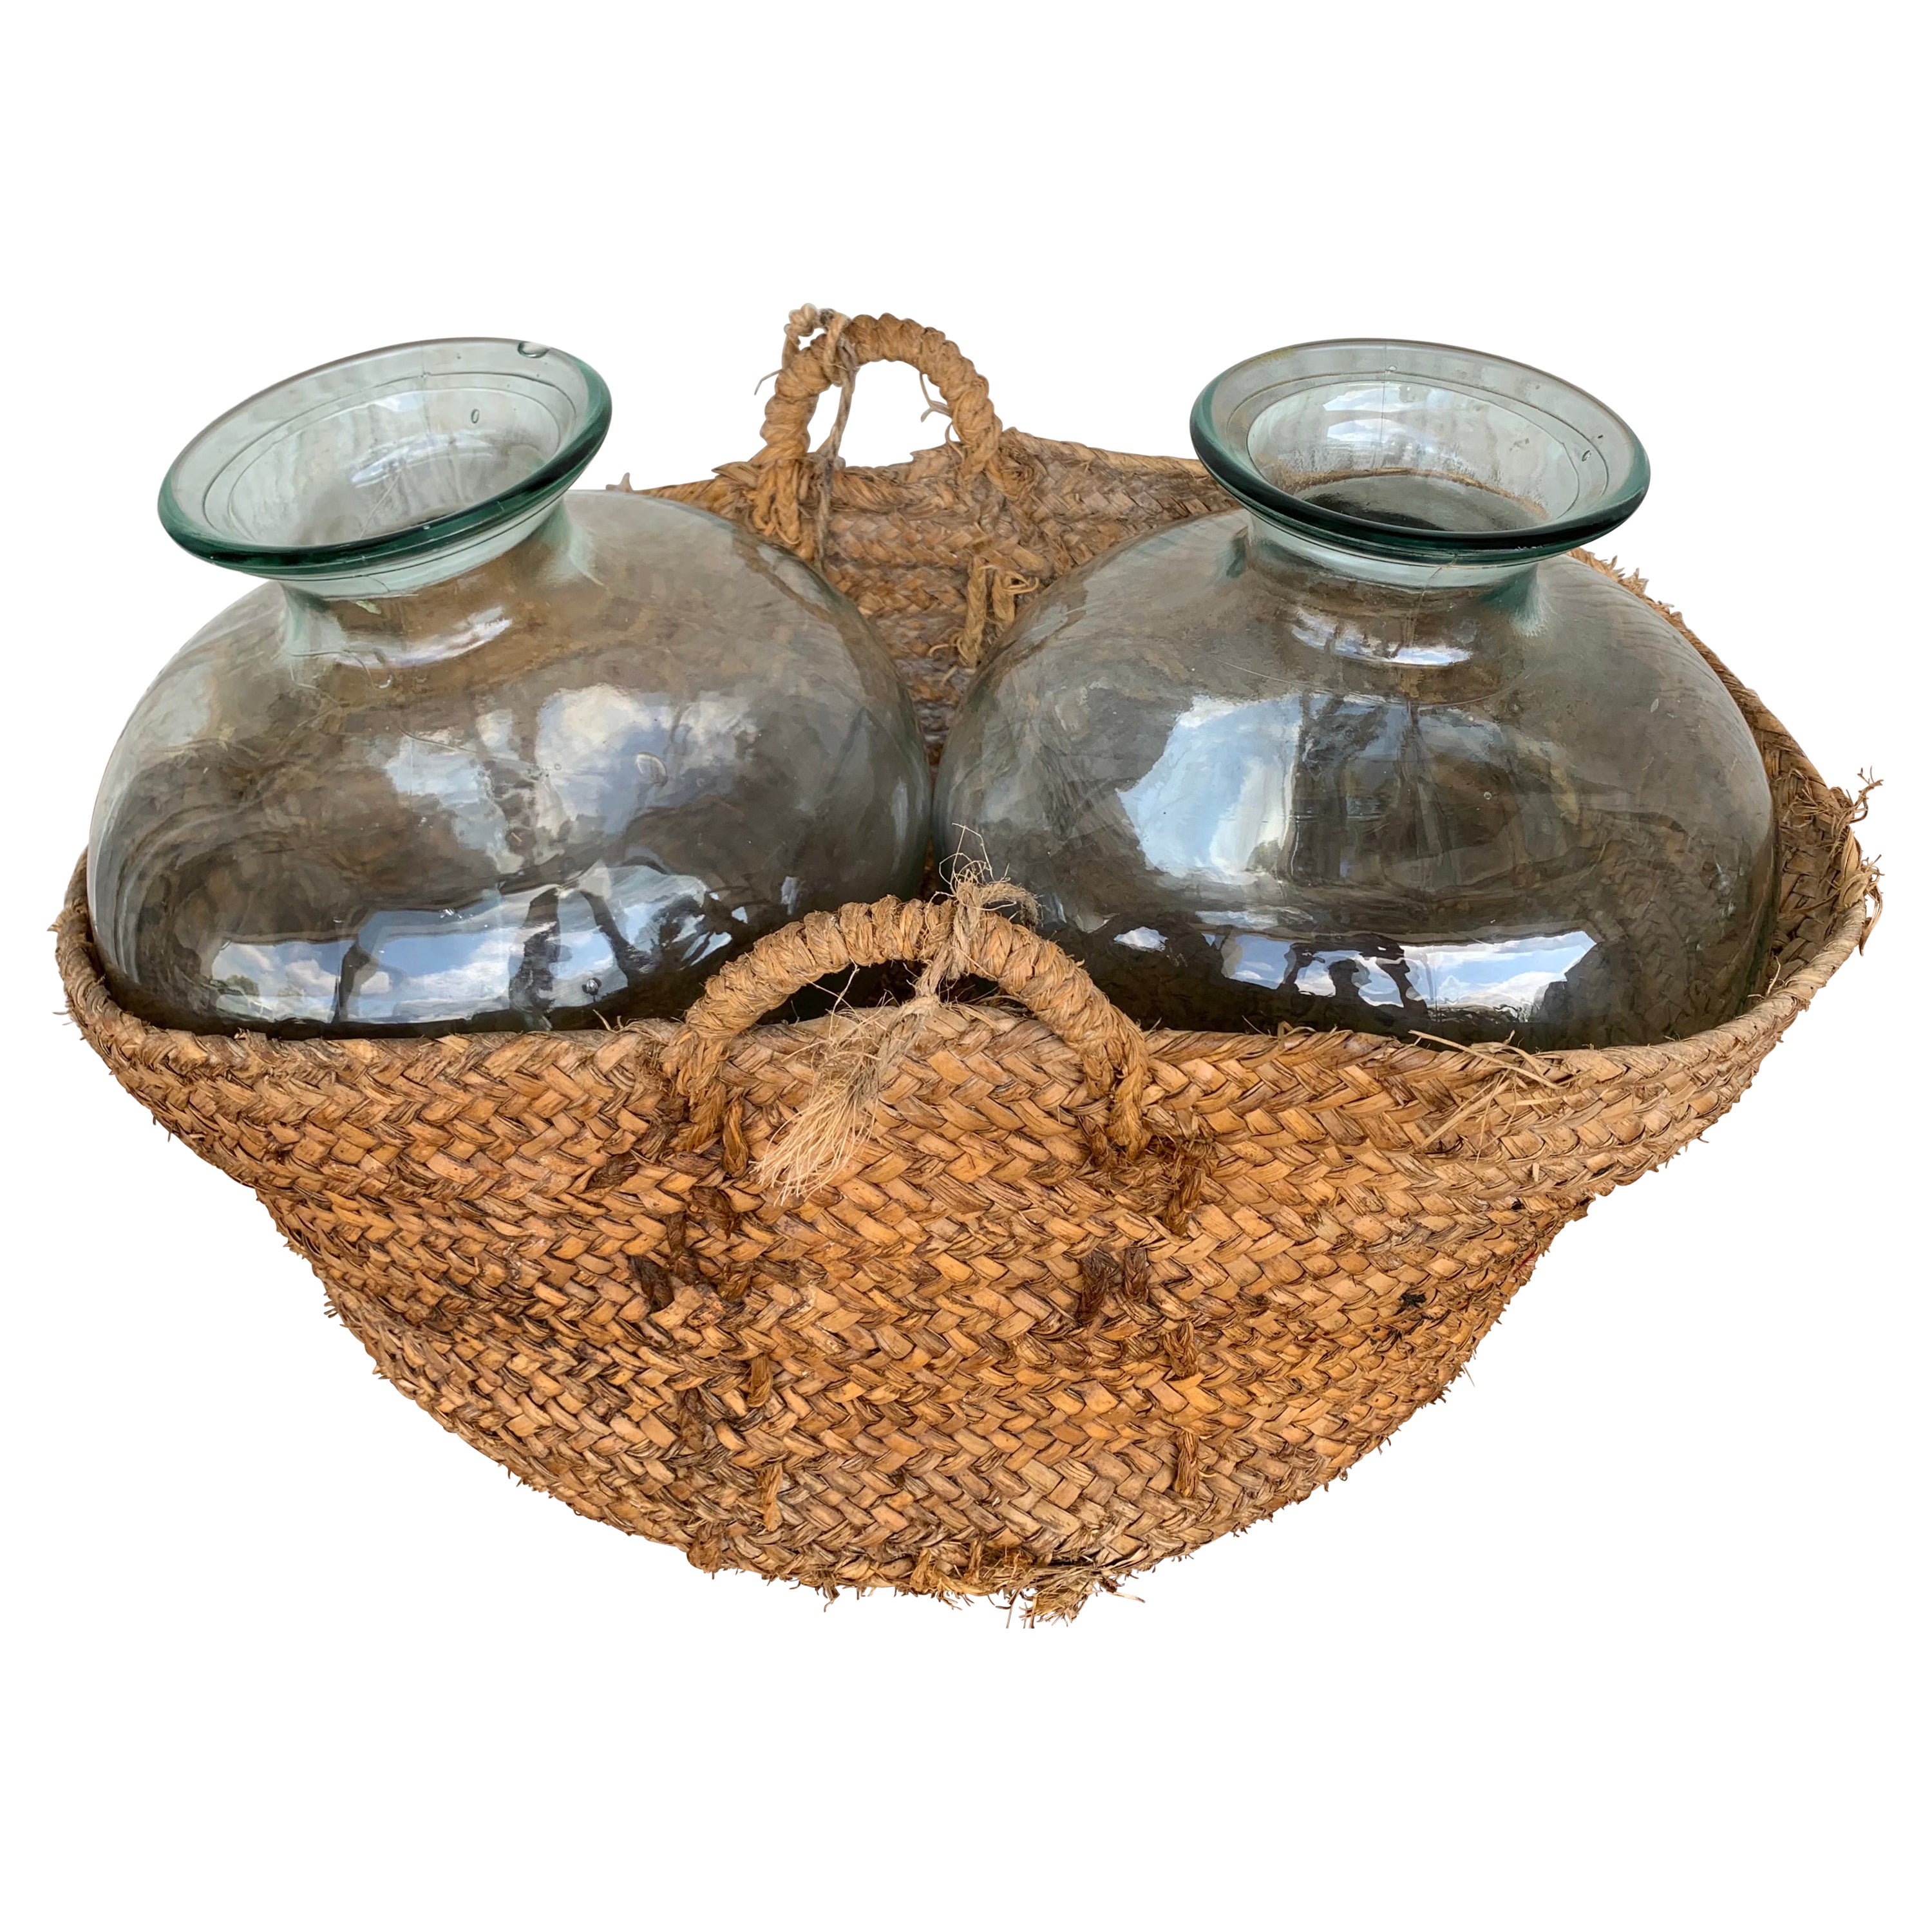 Set of 2 Green Glass French Demijohn Bottles with Woven Esparto Basket For Sale